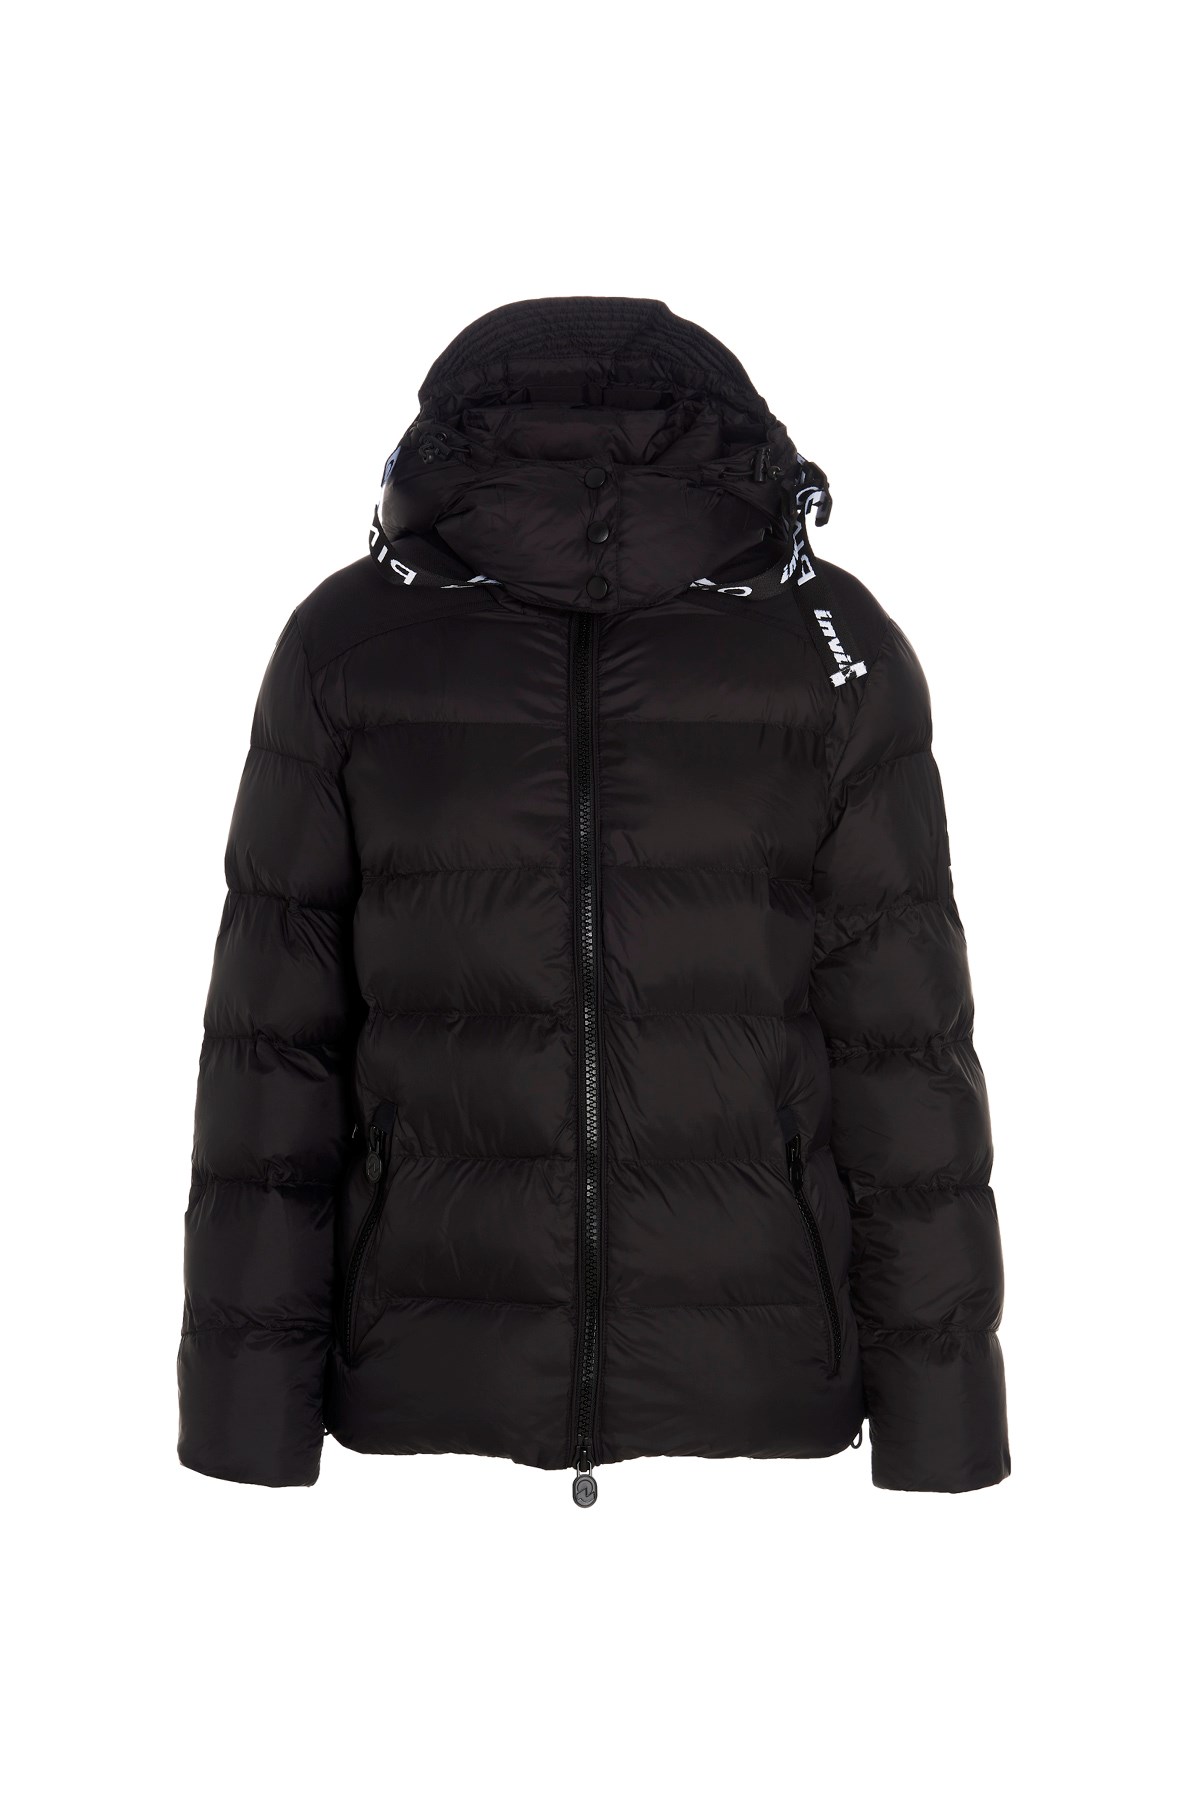 PINKO 'Iperbolico' Puffer Jacket In Collab. With Invicta